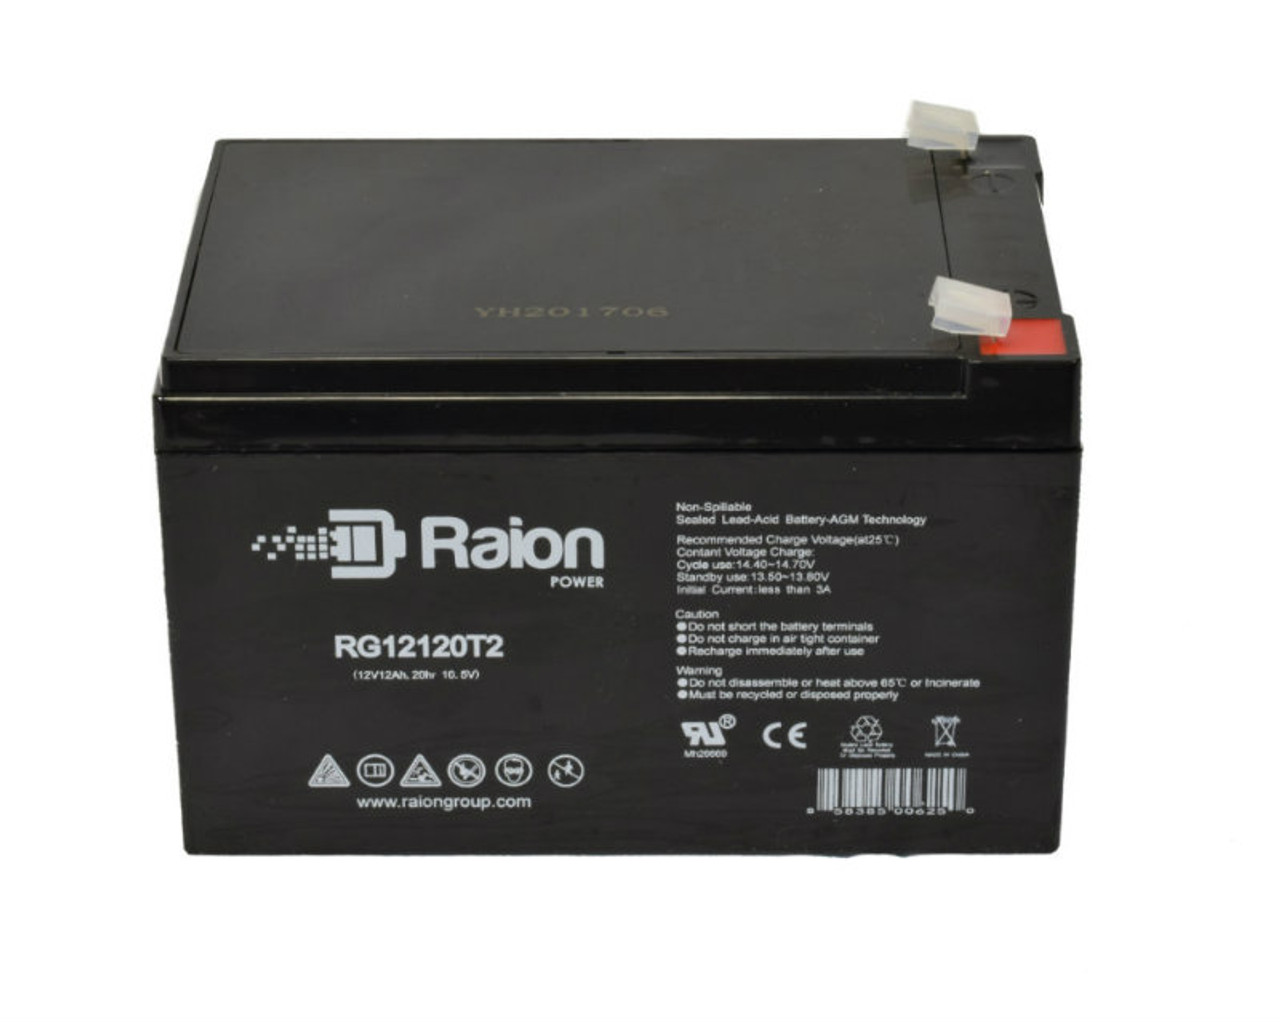 Raion Power RG12120T2 Replacement Battery Cartridge for Belkin OMNIGUARD3200